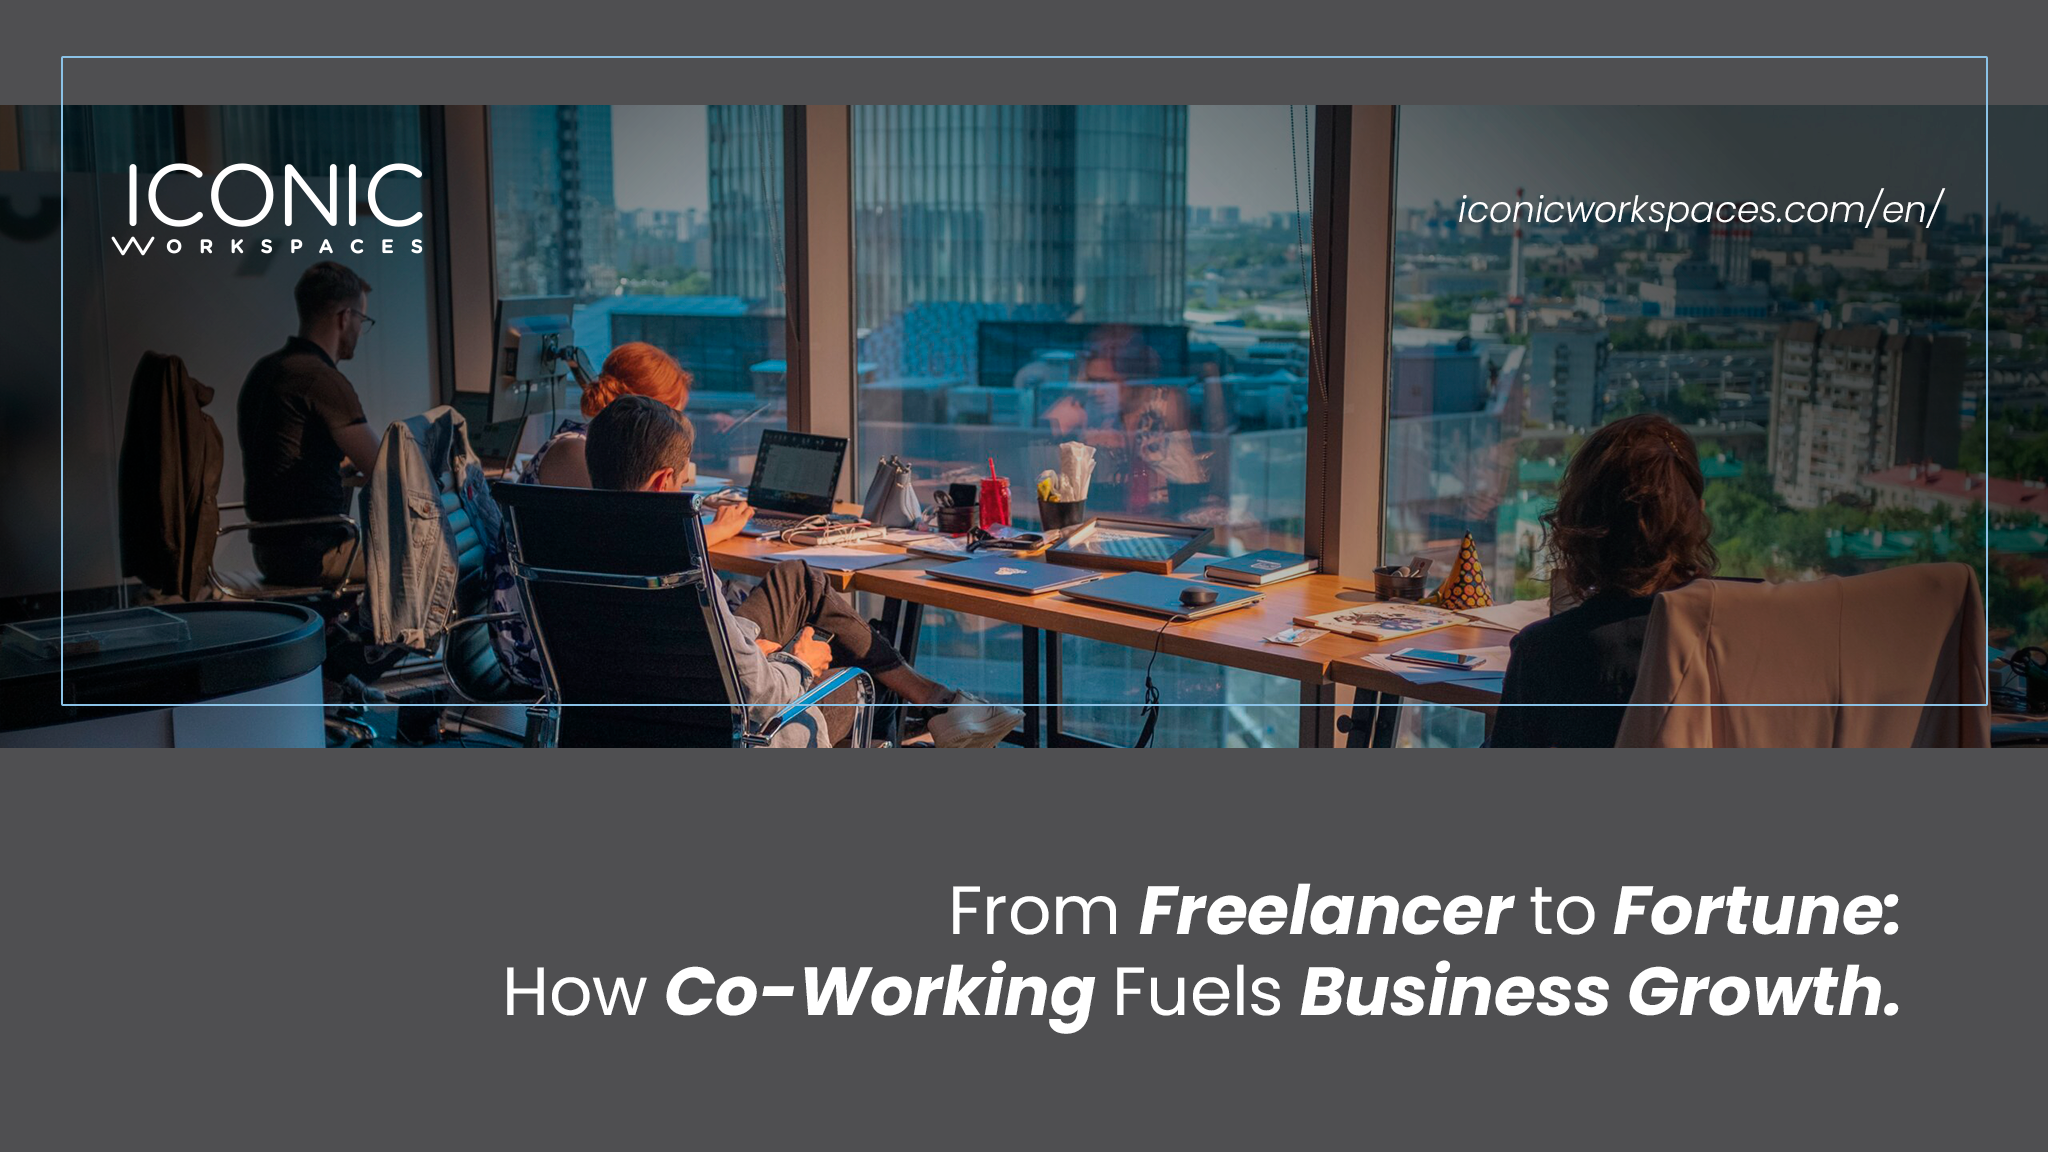 From Freelancer to Fortune: How Co-Working Fuels Business Growth